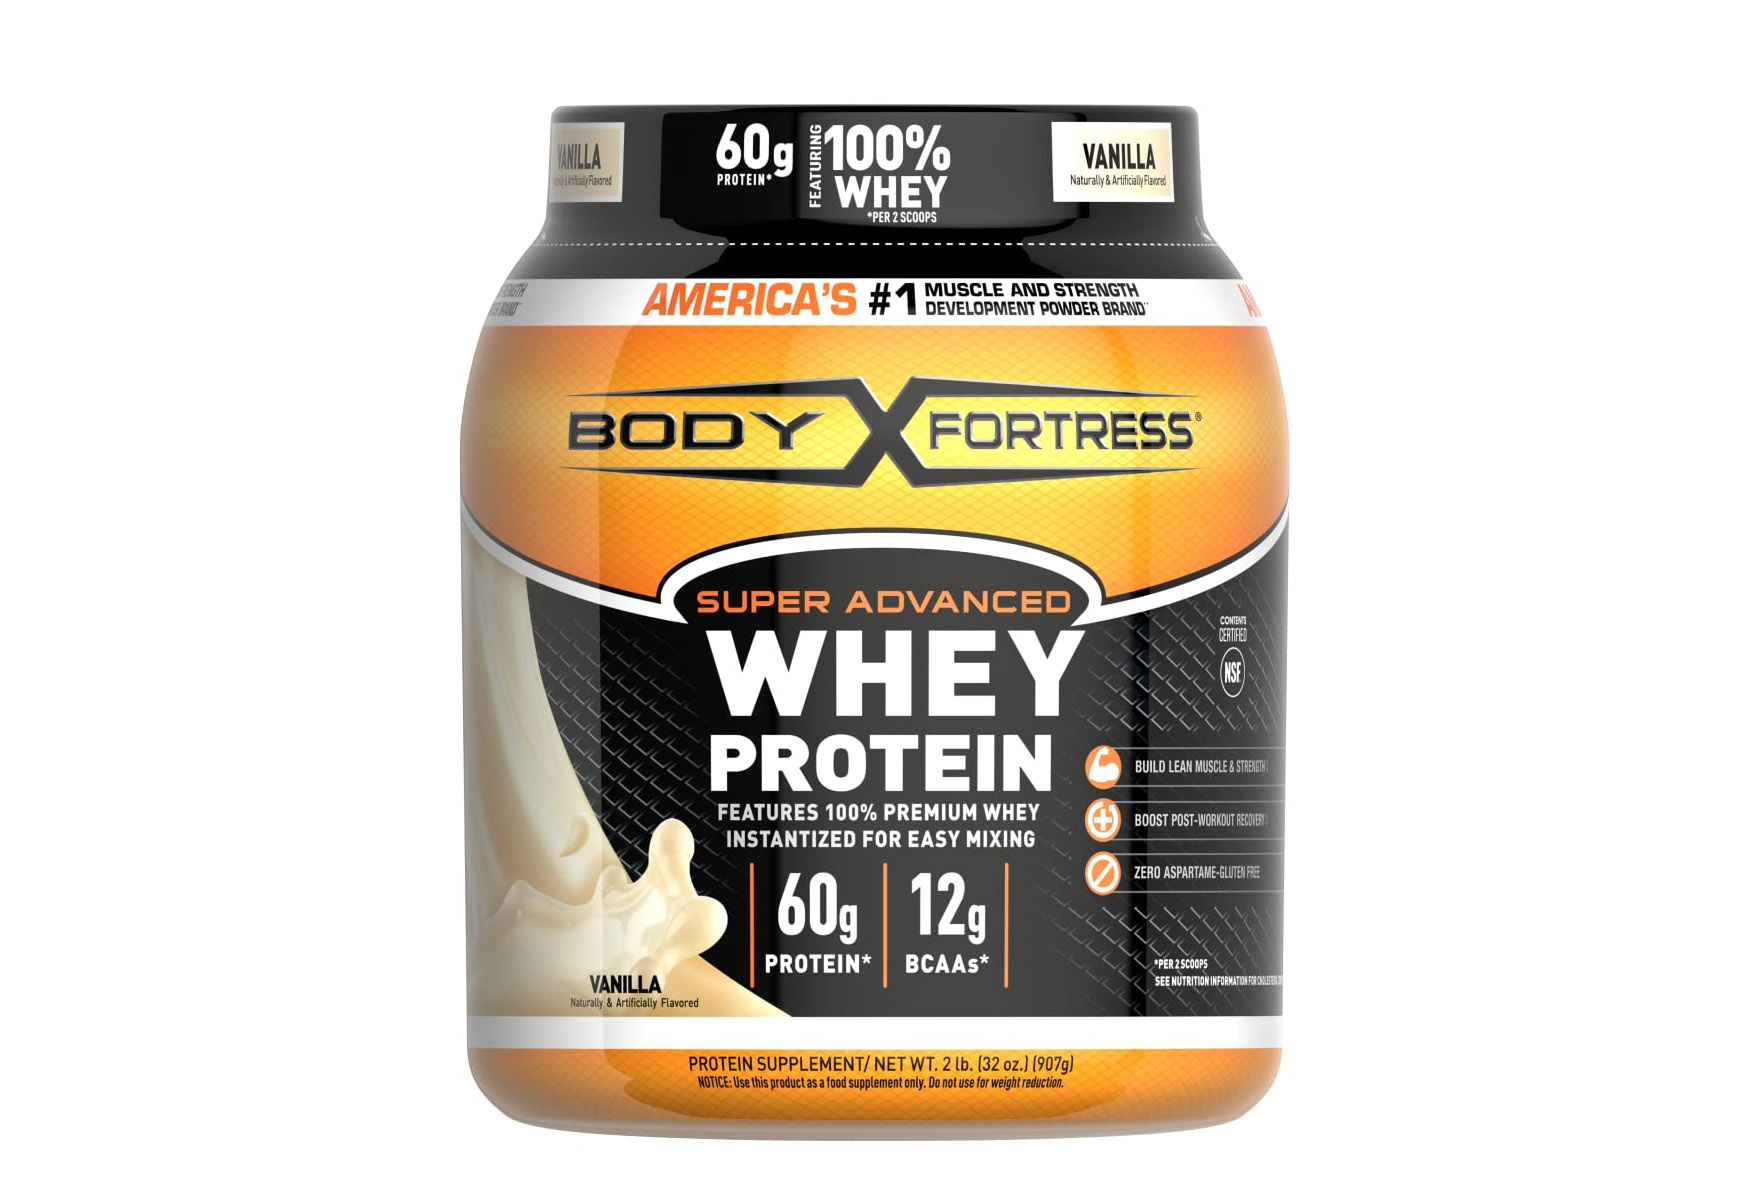 15-body-fortress-vanilla-whey-protein-nutrition-facts